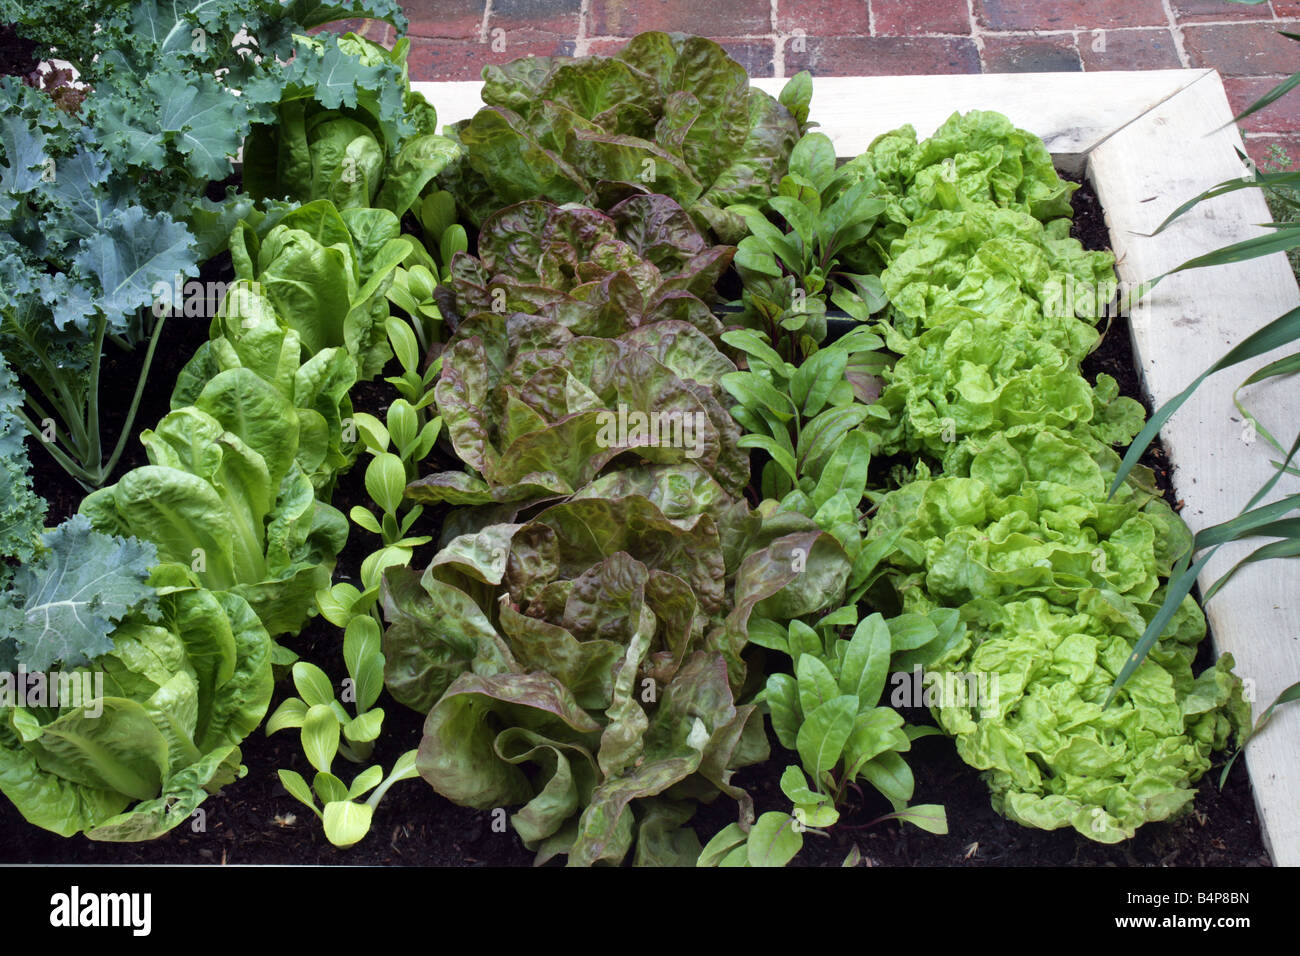 Salad crops growing in a raised bed Stock Photo